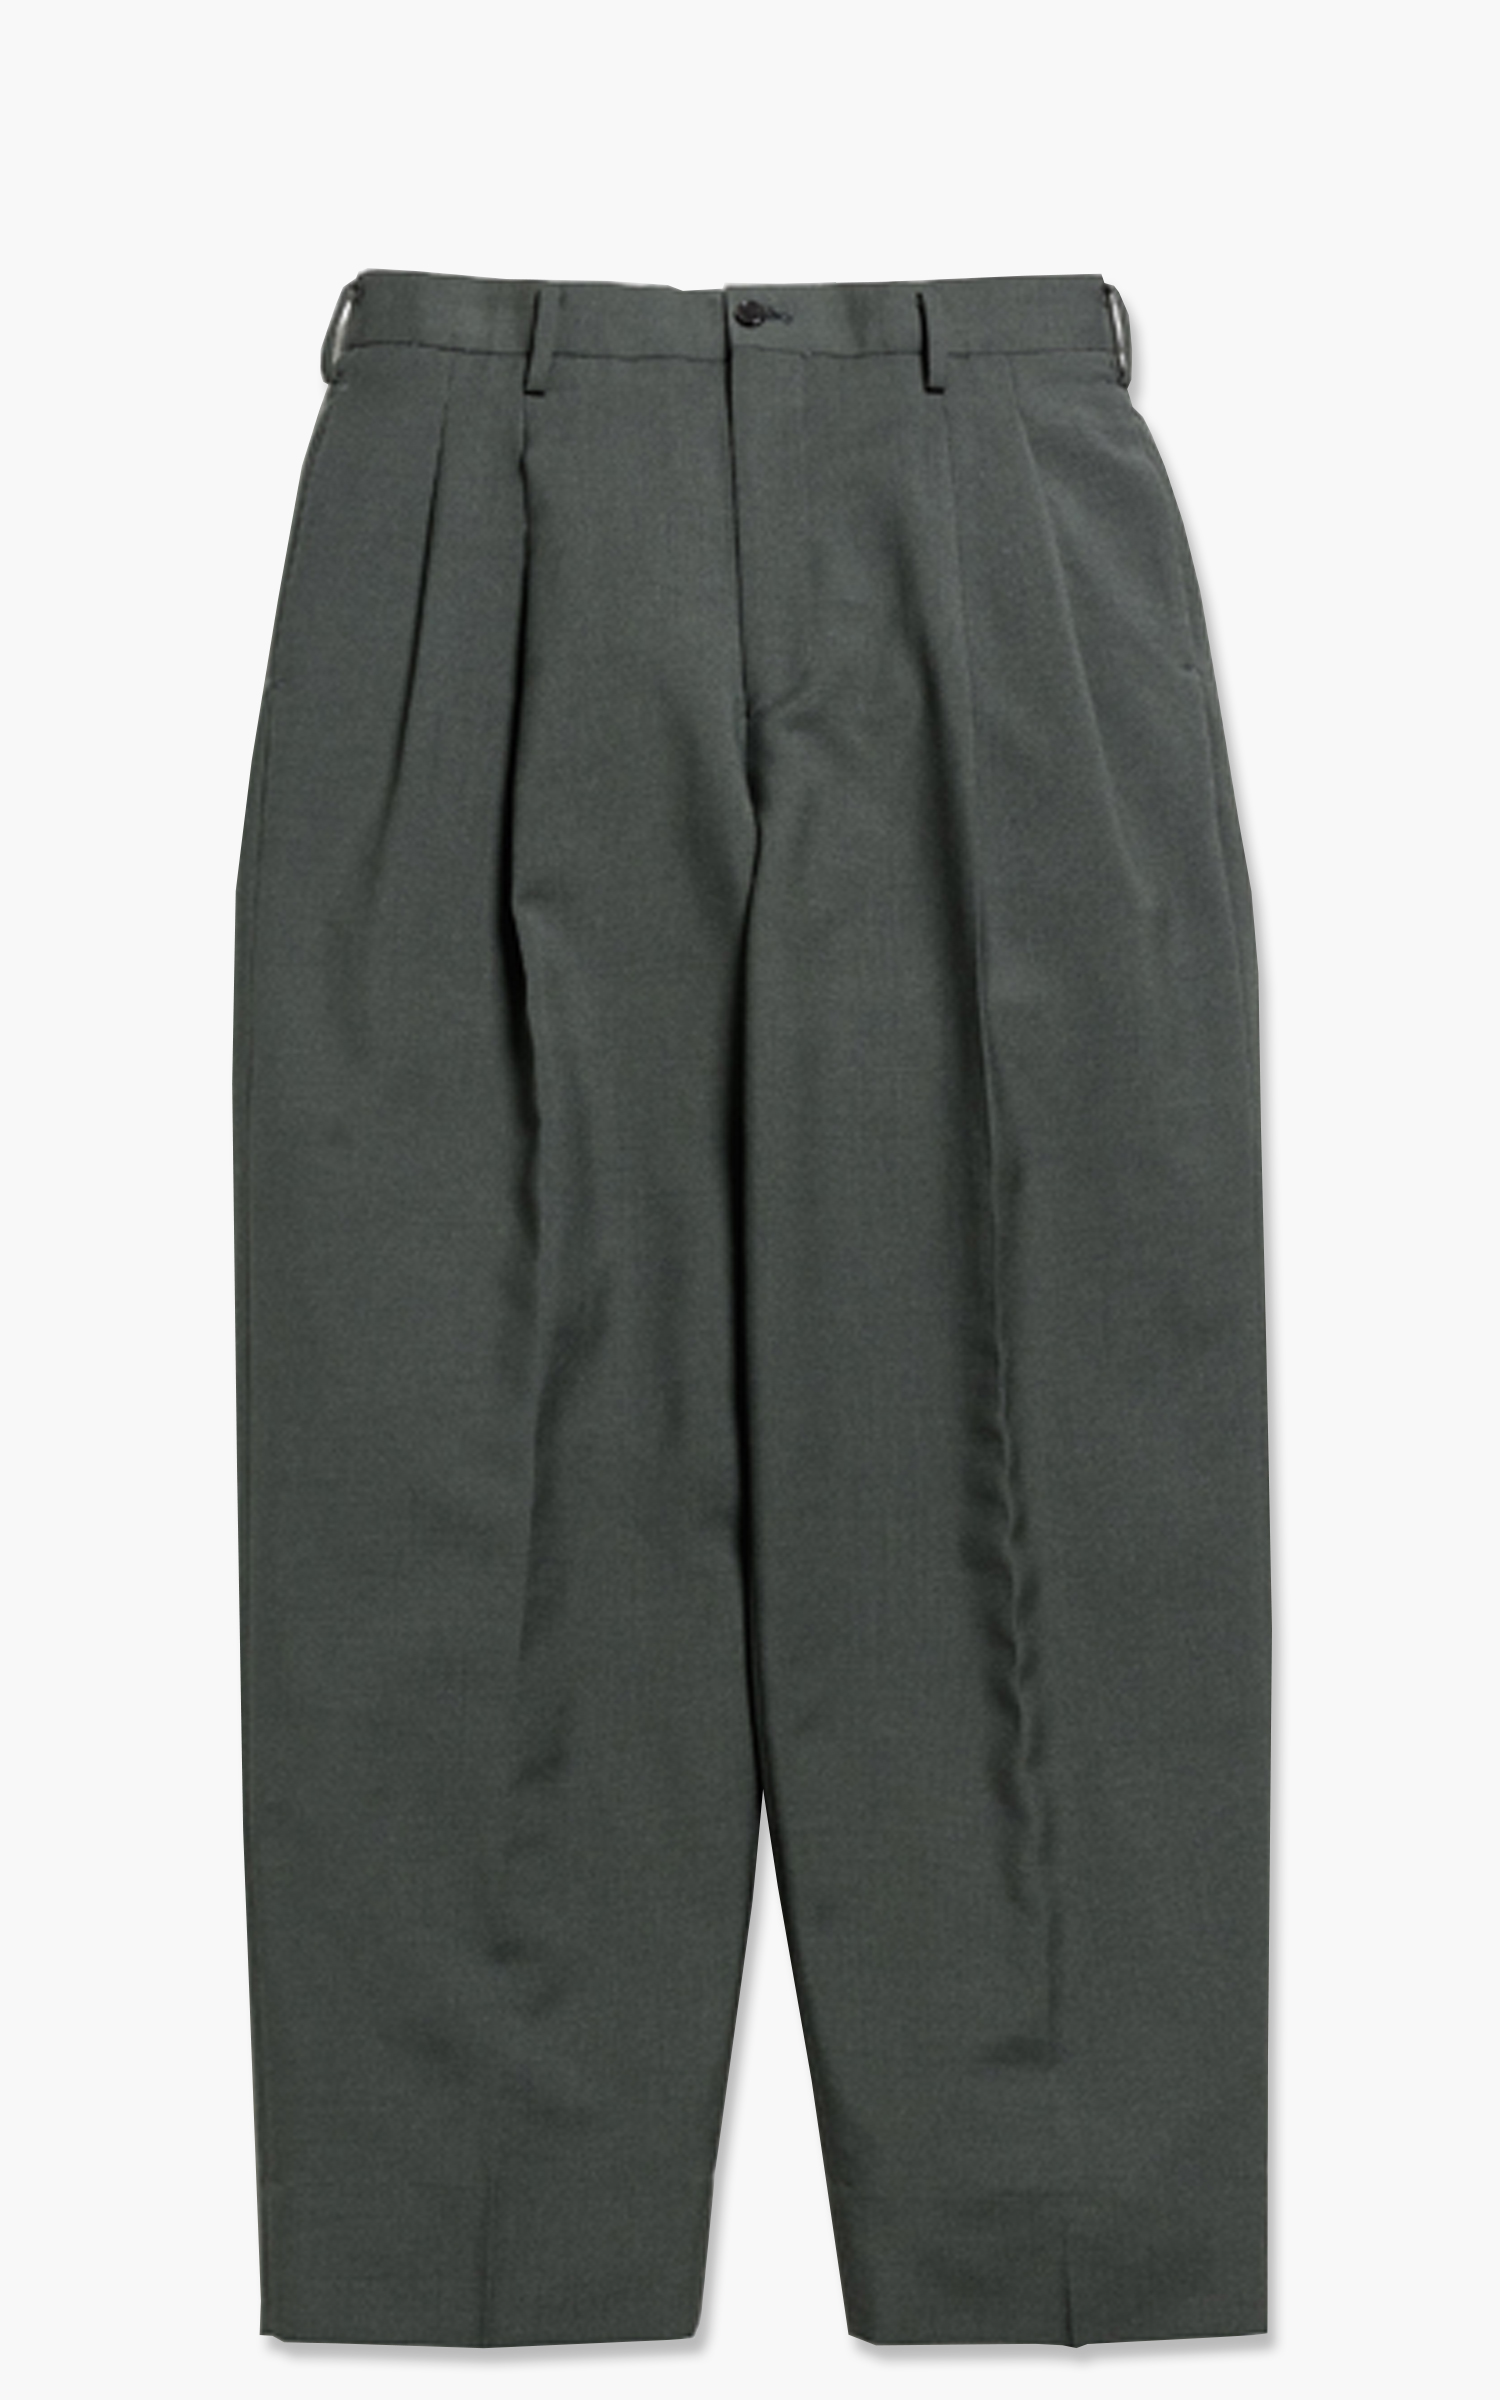 Markaware 'Marka' Wool Mohair Tropical 2Tuck Cocoon Fit Trousers Olive